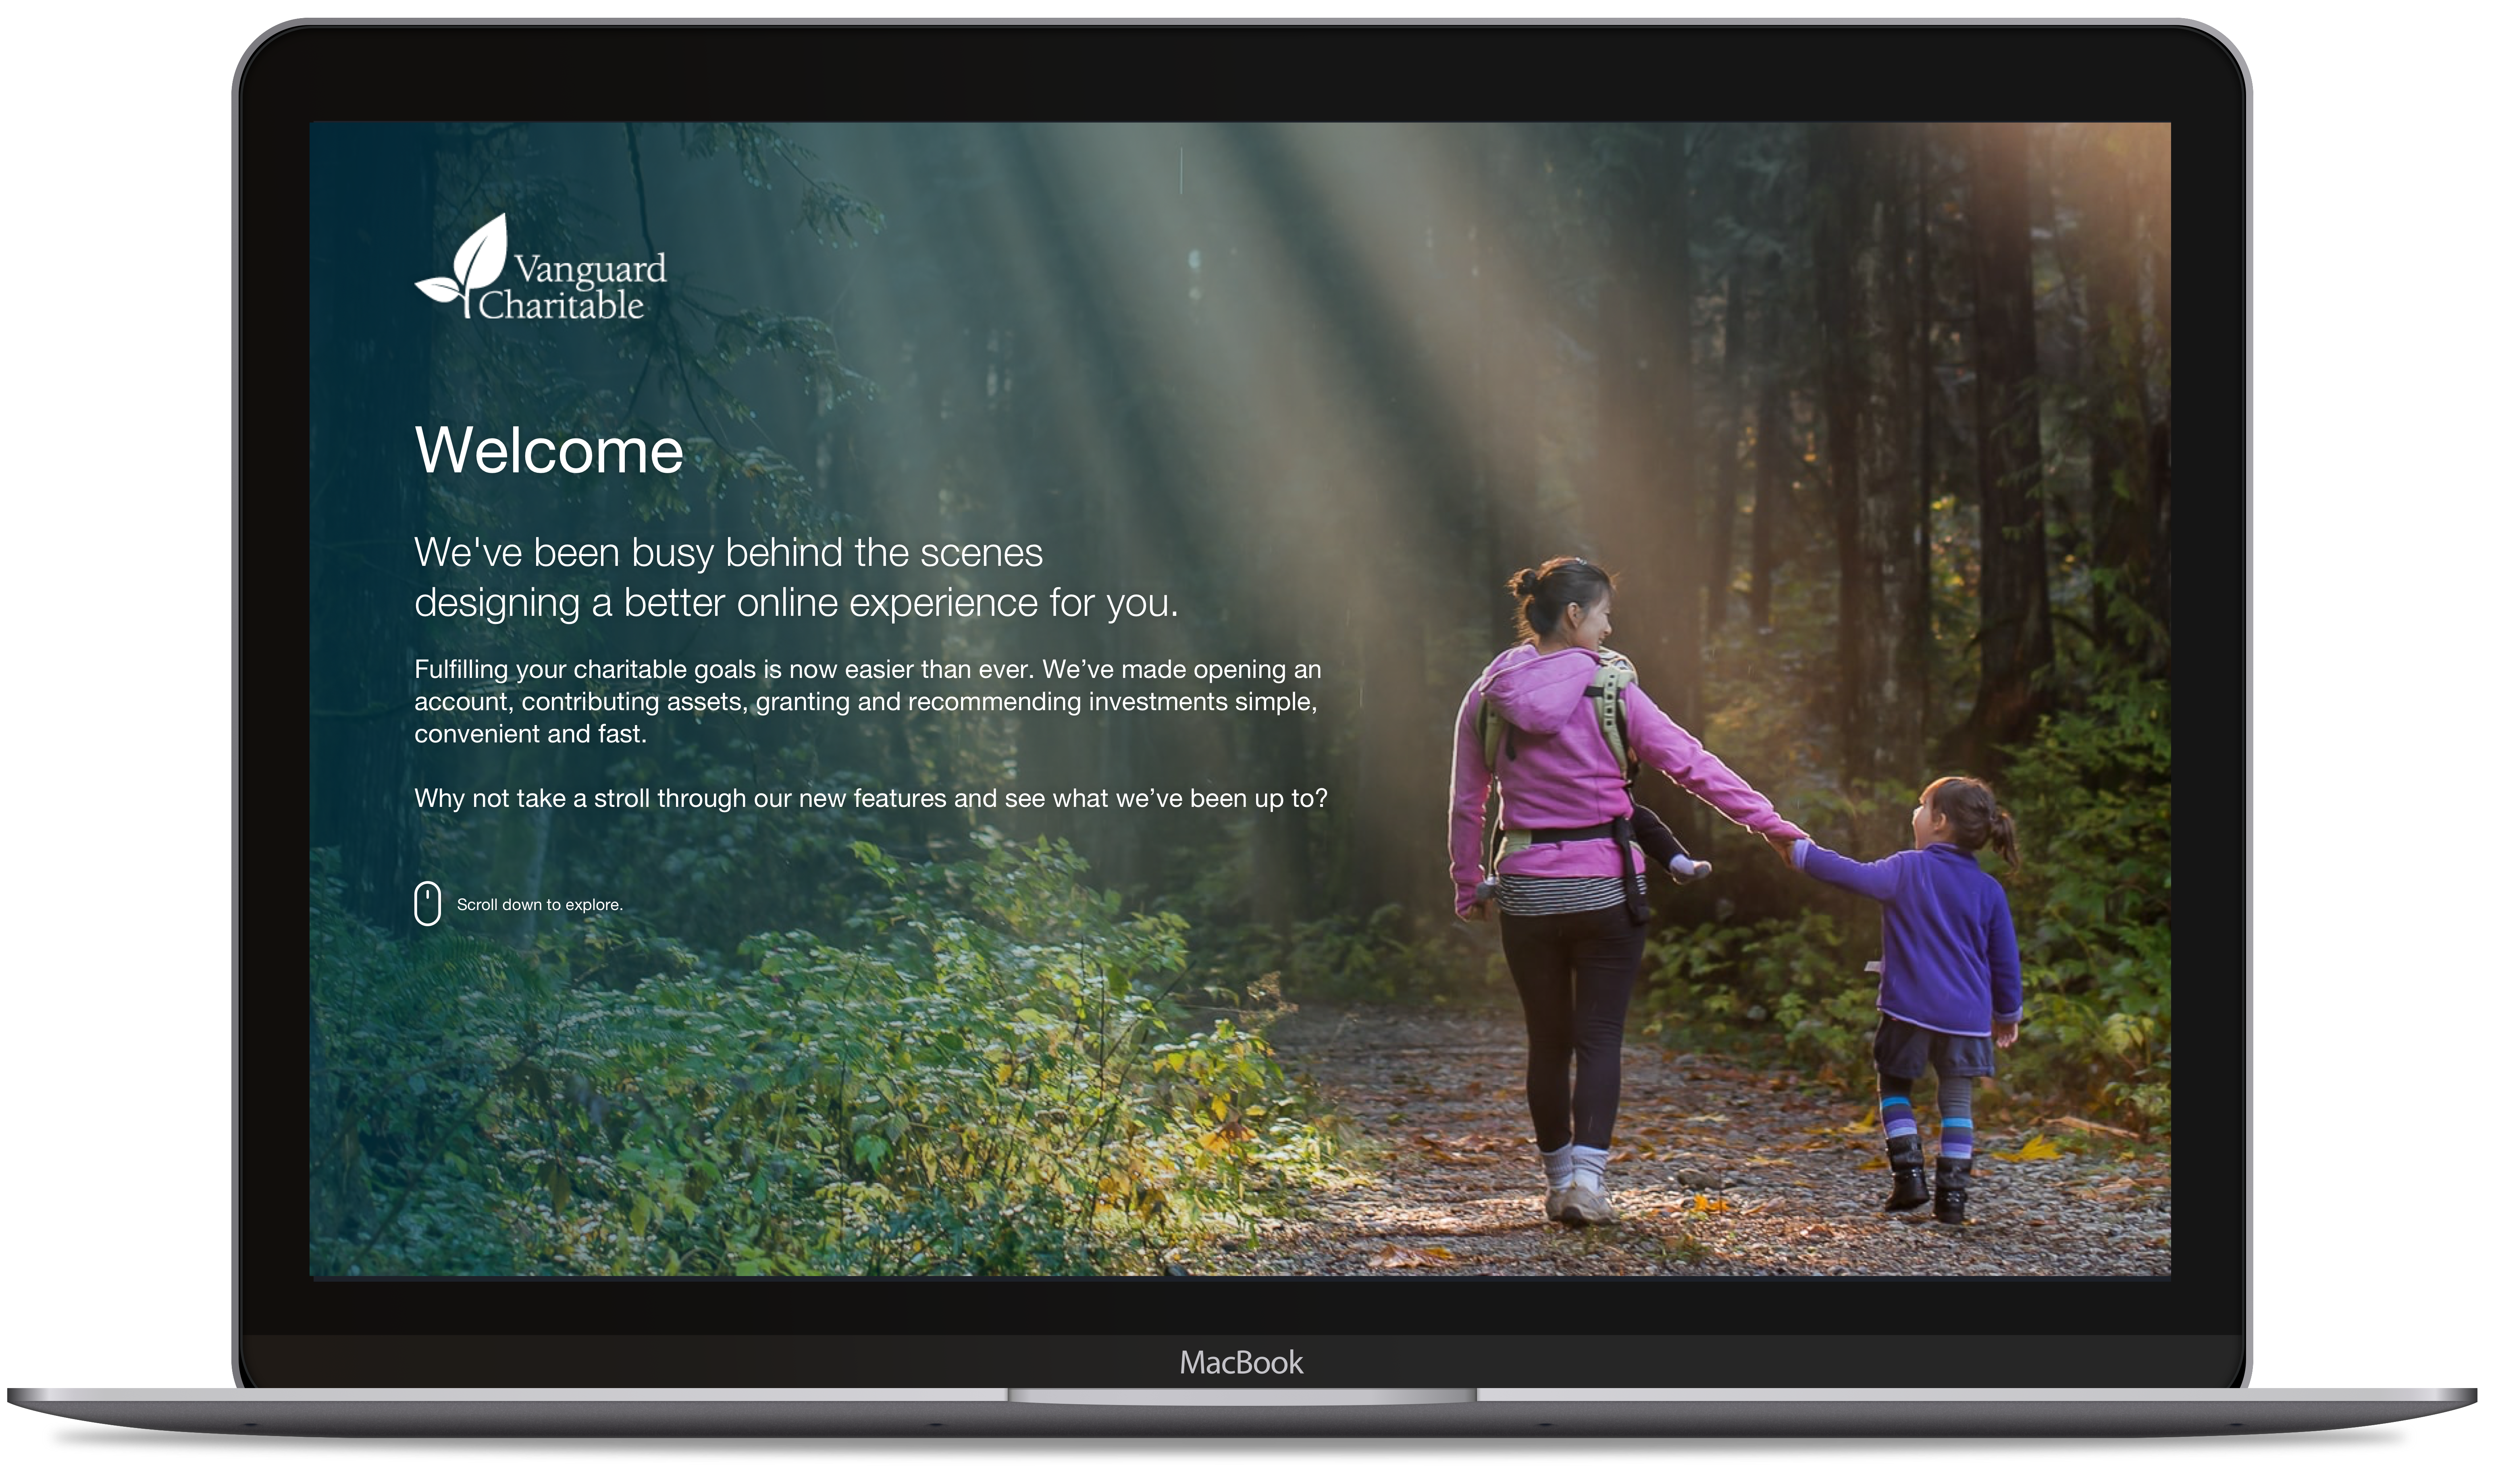 Laptop opened to display a page from the new Vanguard Charitable welcome screen